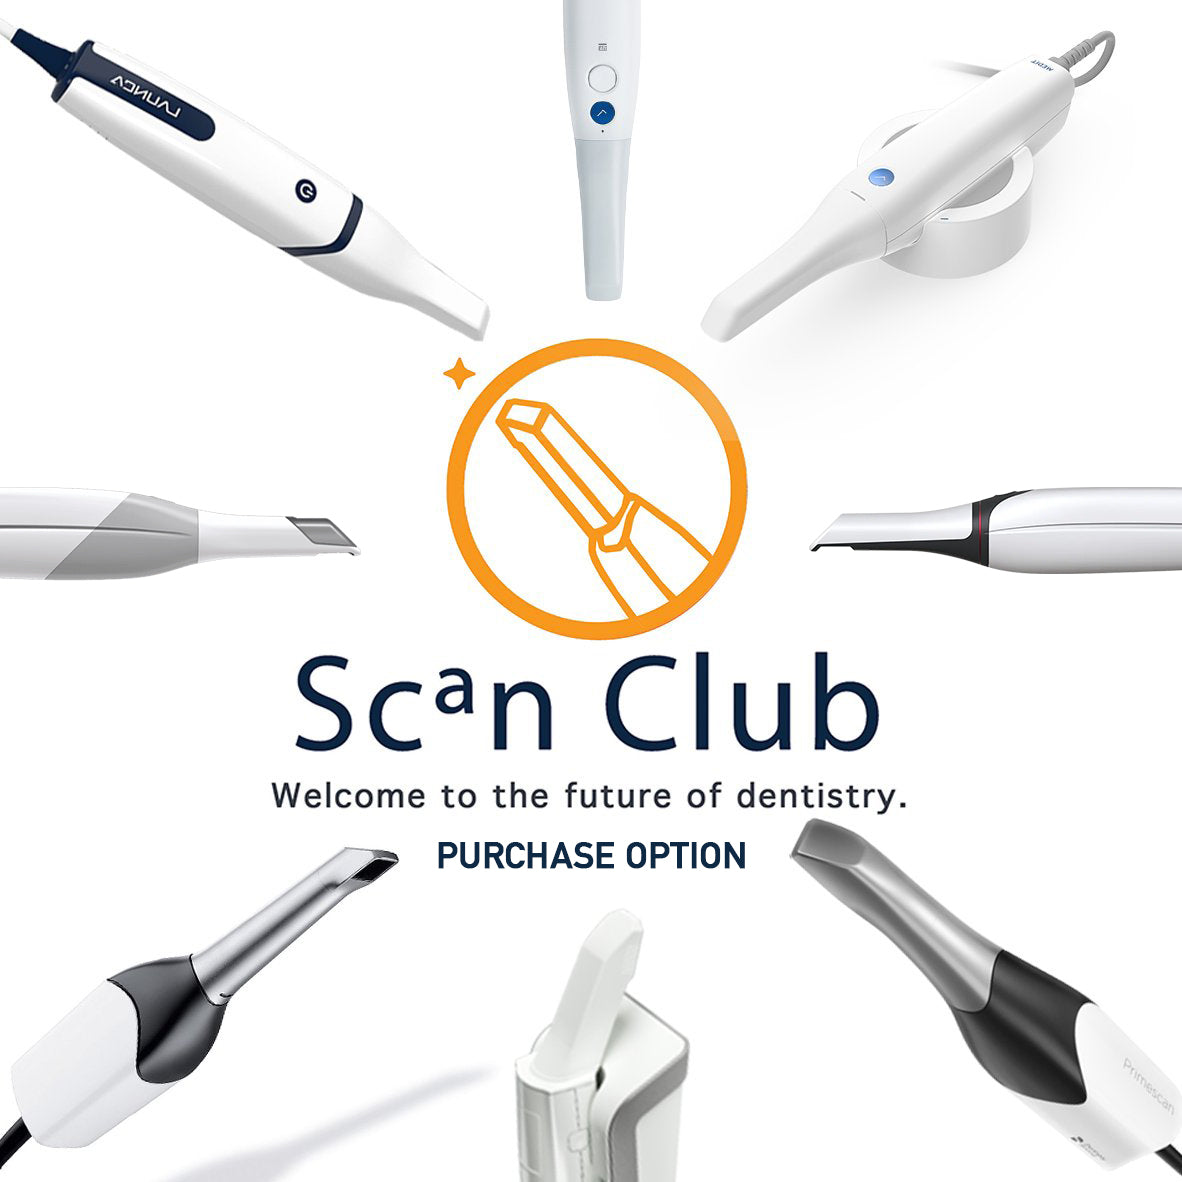 Scan Club - Scanner Purchase Option